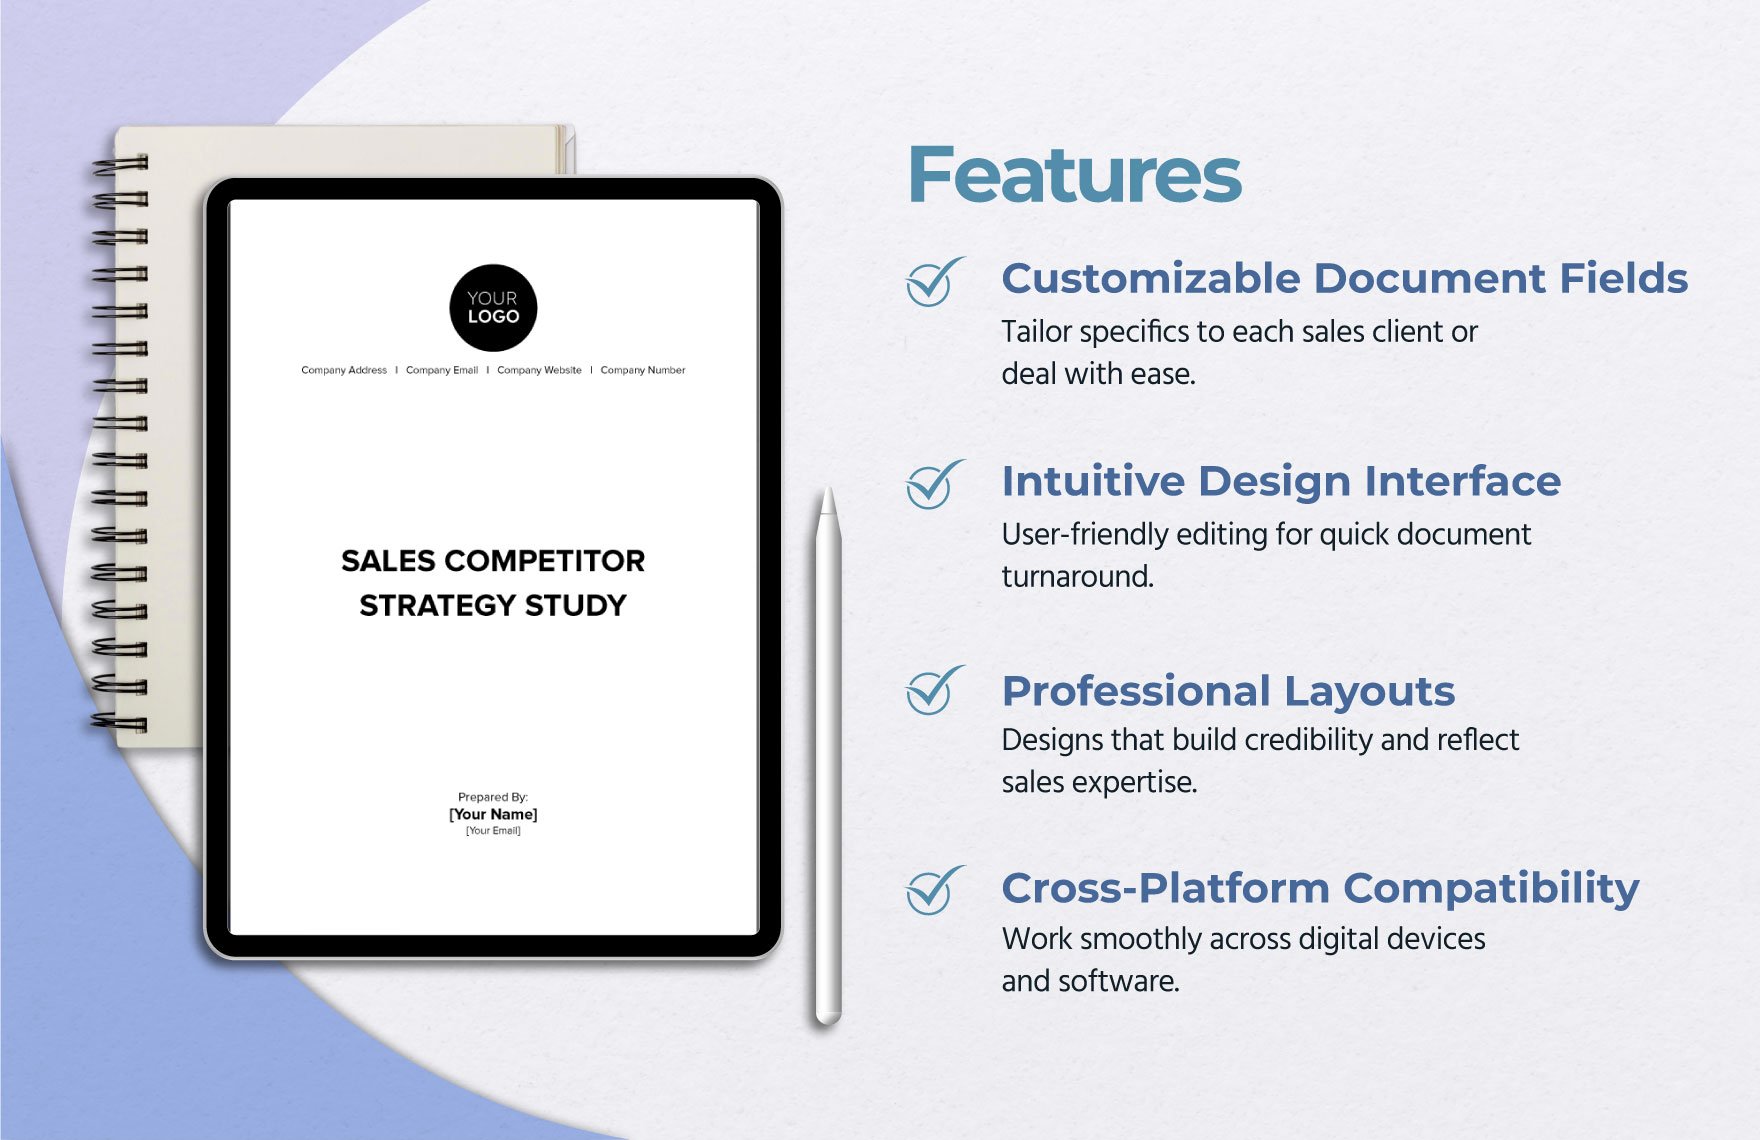 Sales Competitor Strategy Study Template